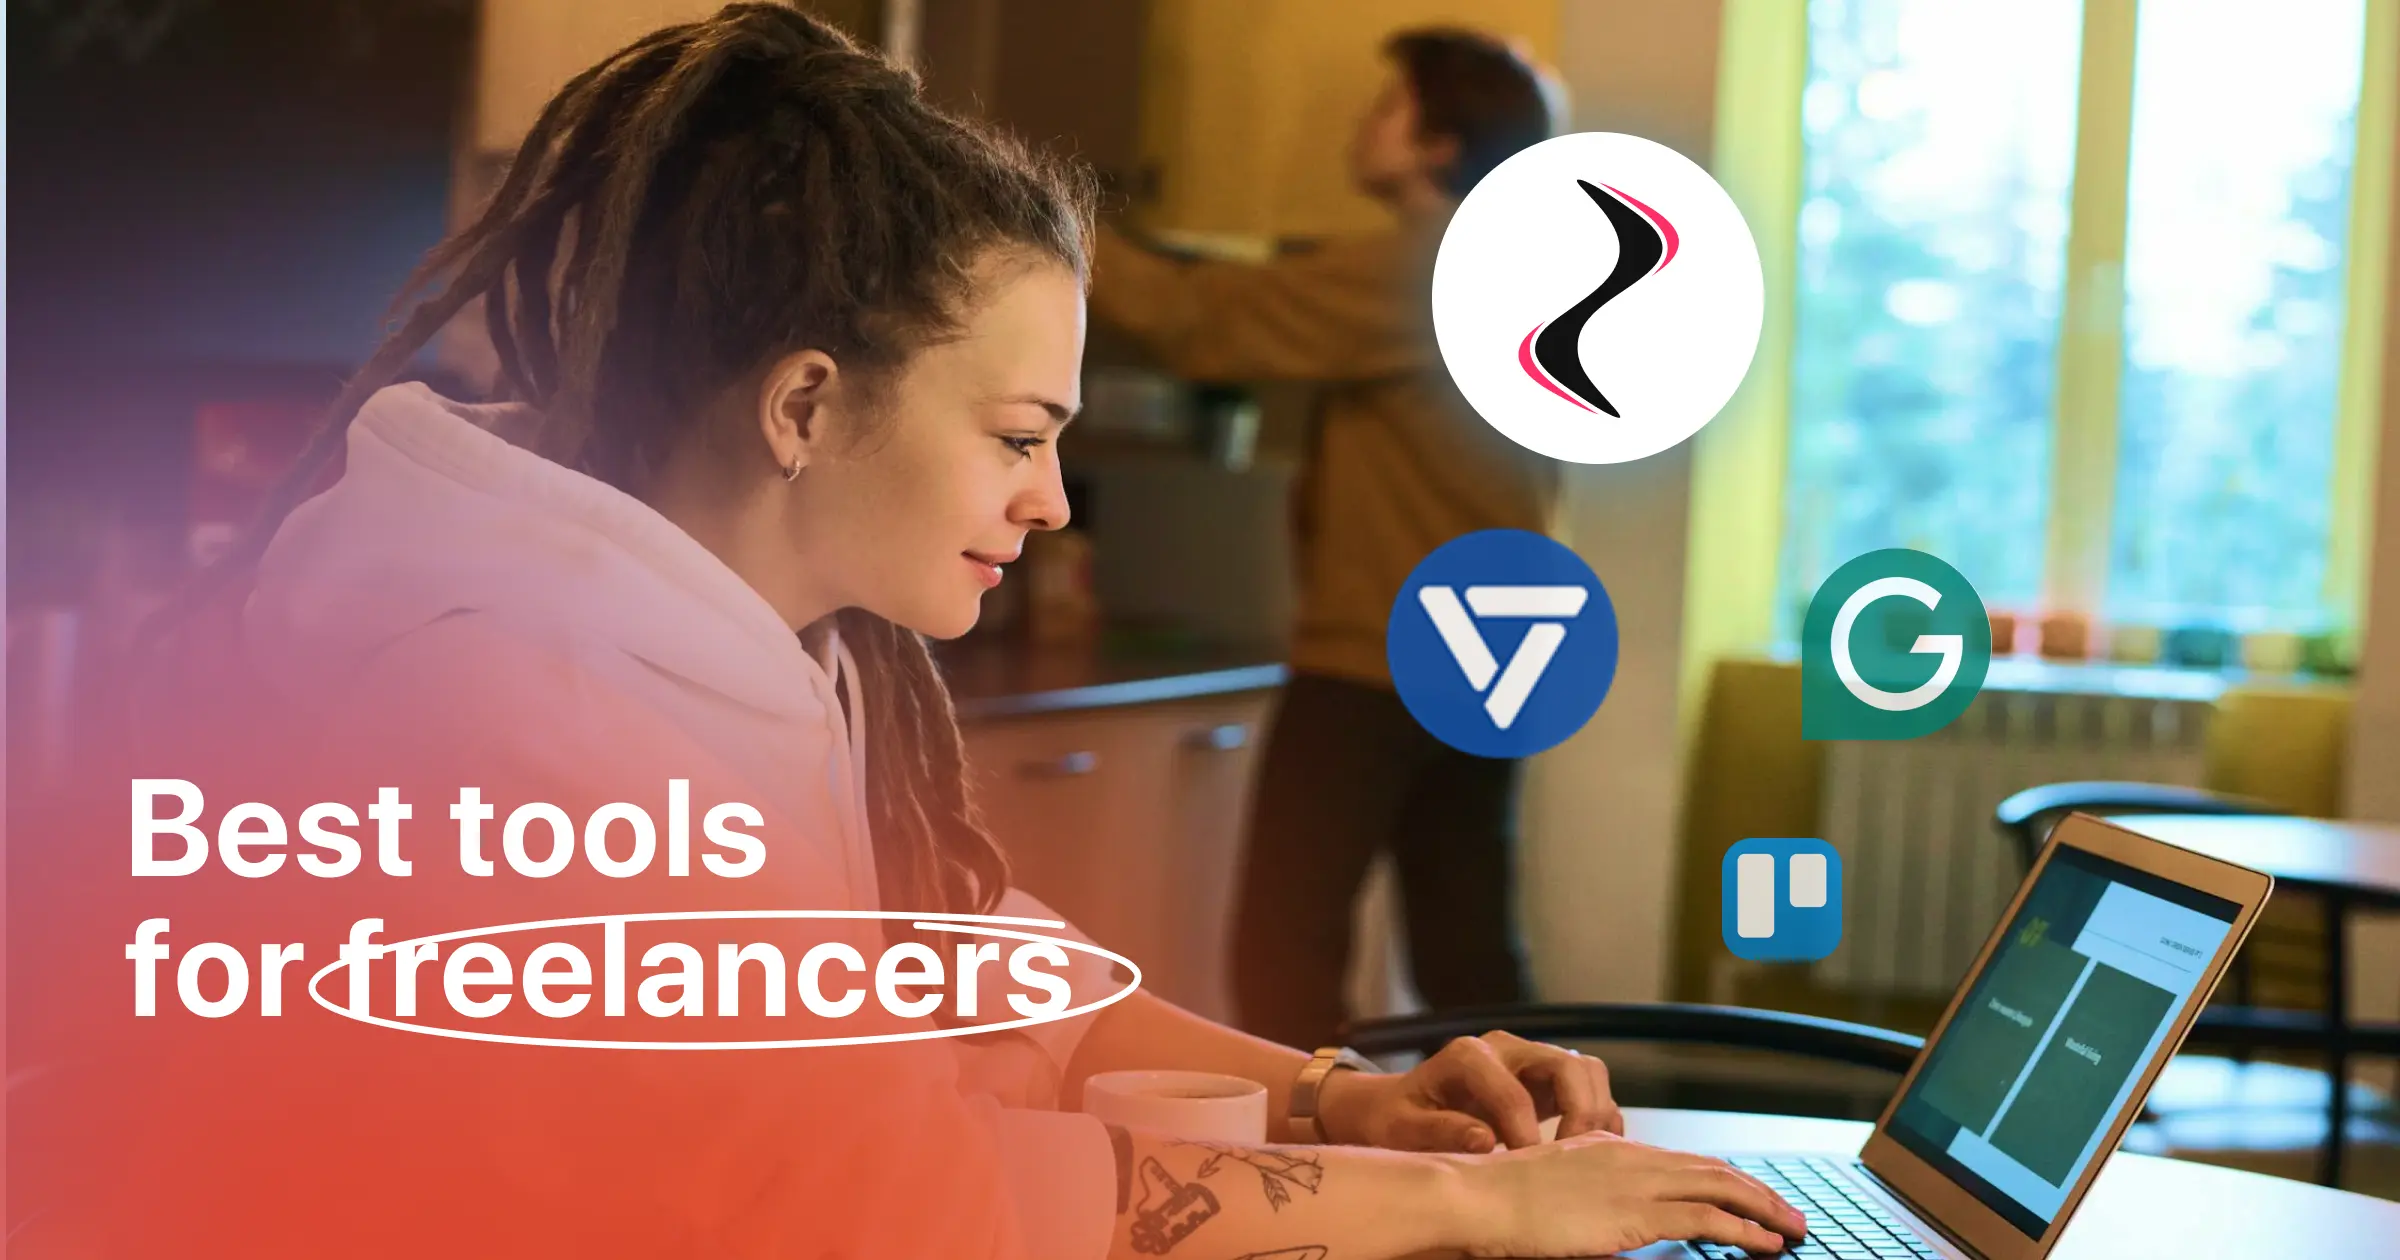 13 Best Tools for Freelancers: From Productivity to Finances